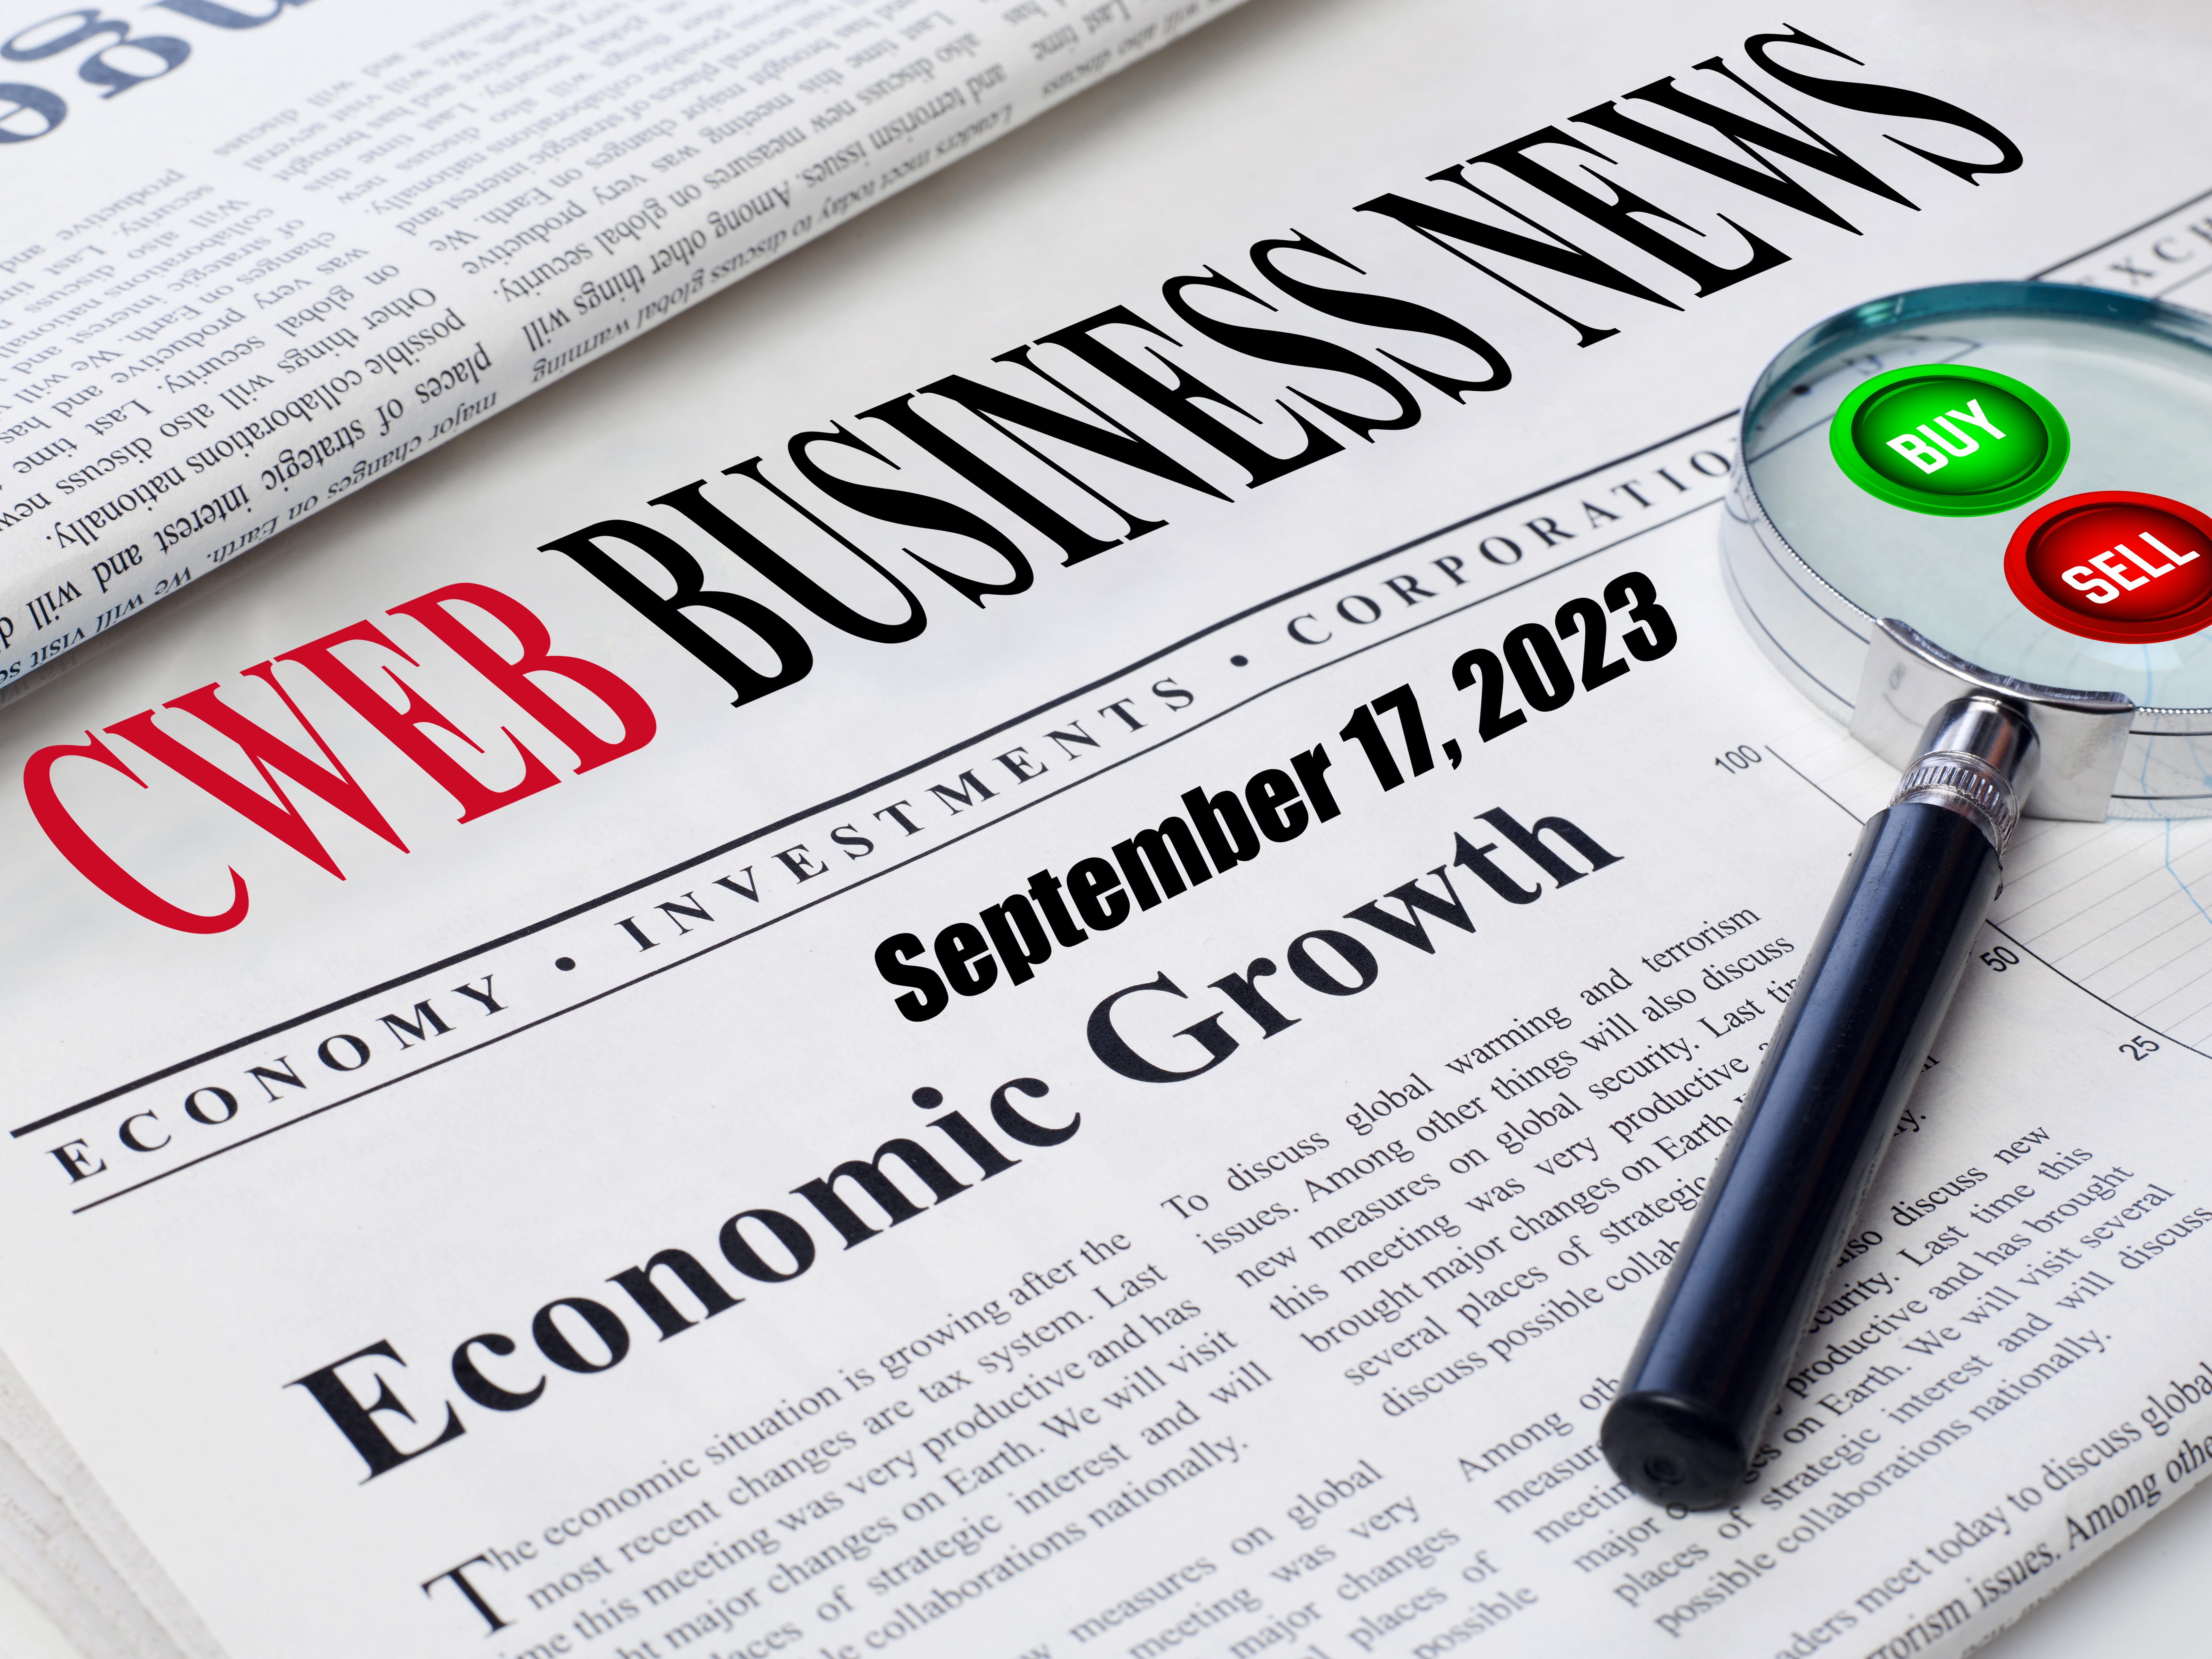 CWEB’s Daily Summarized Business Newsletter for September 17, 2023